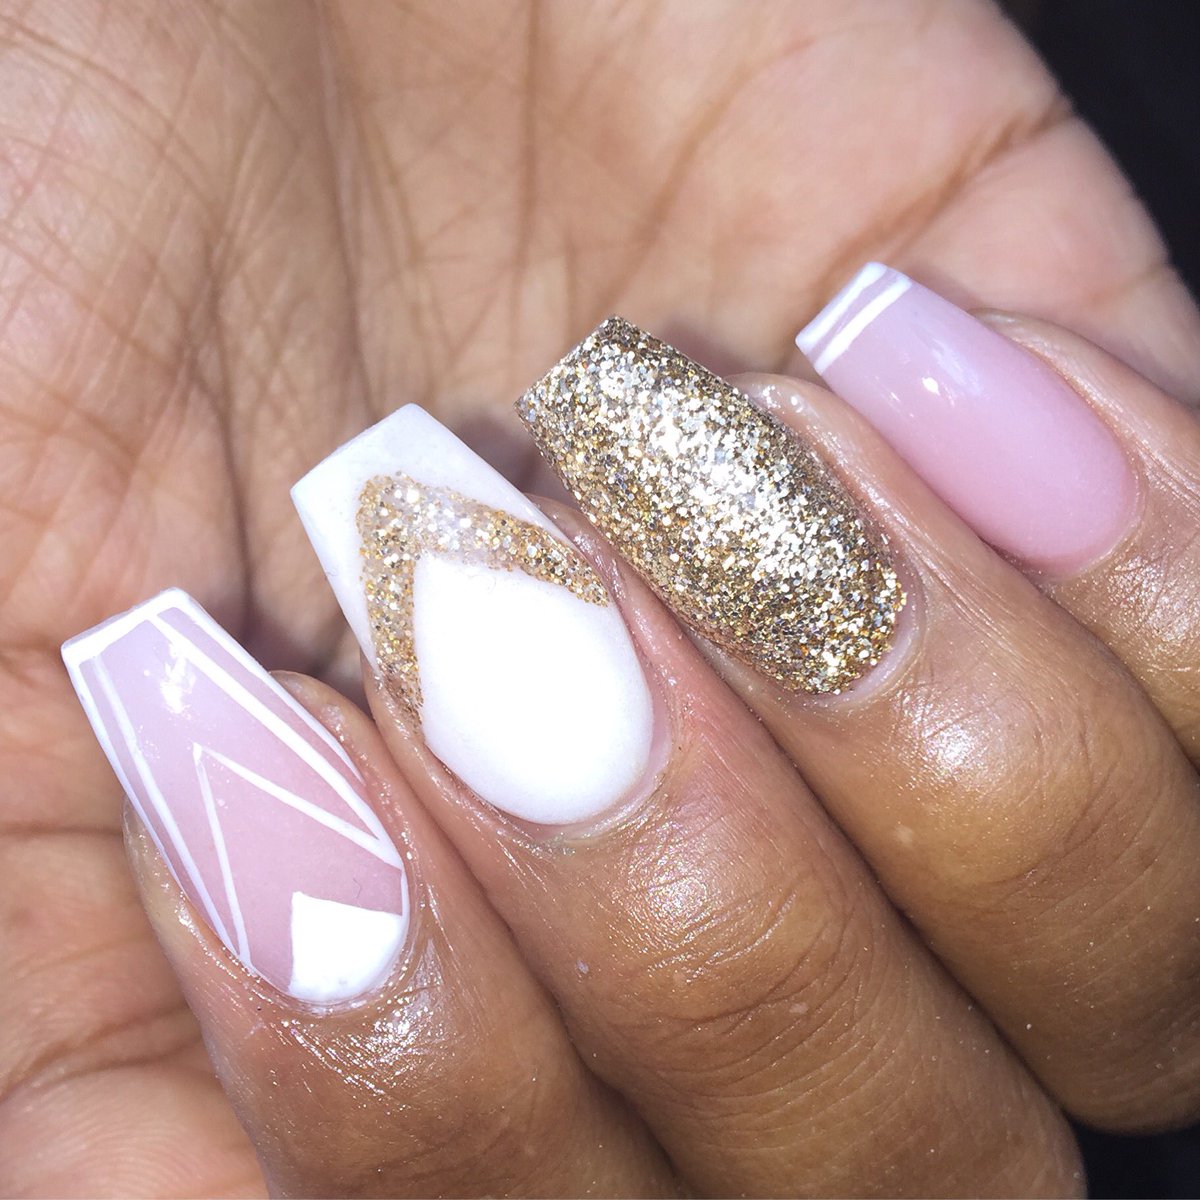 RT @MicheleKimmi: Let me glam your nails for your Detroit show!! @ashanti #DetroitNailtech https://t.co/XdAx0F0cB4 > Cute ????????❤️